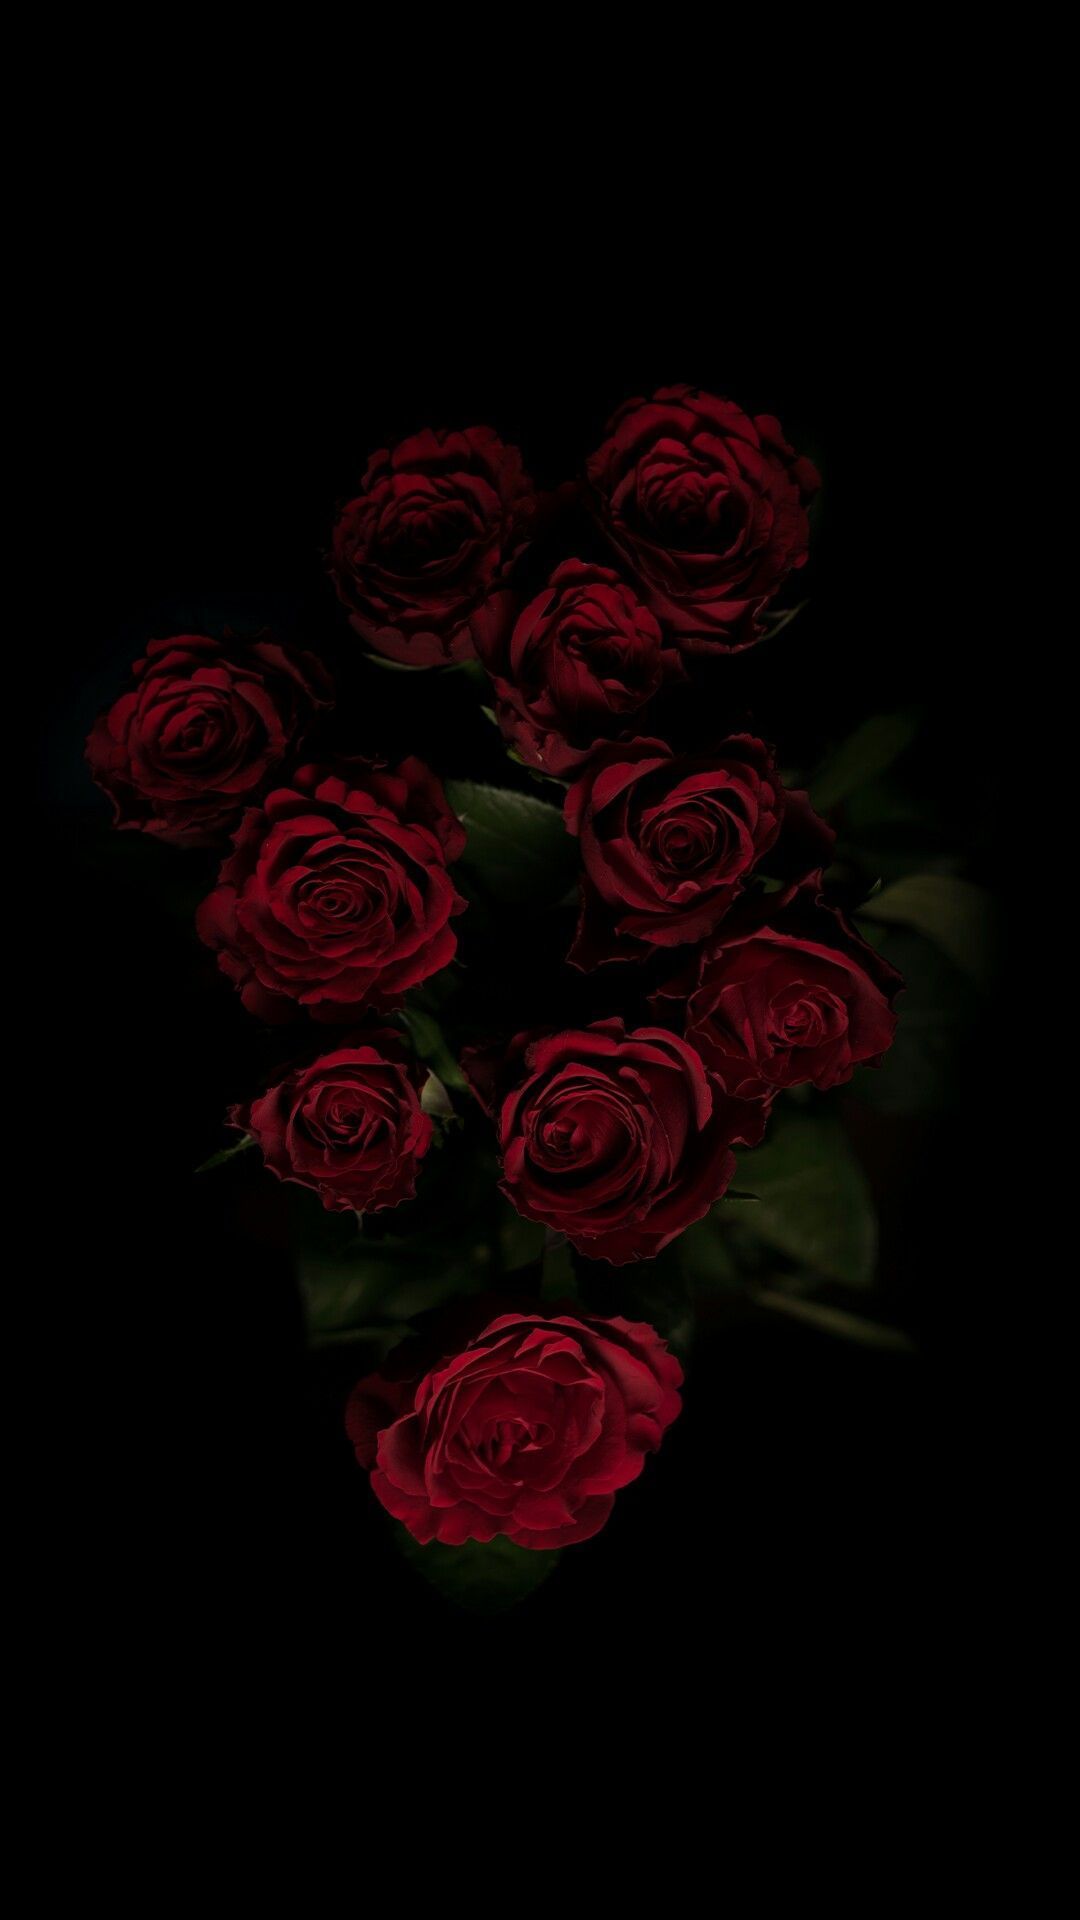 Red roses on a black background - Roses, dark red, photography, black rose, gothic